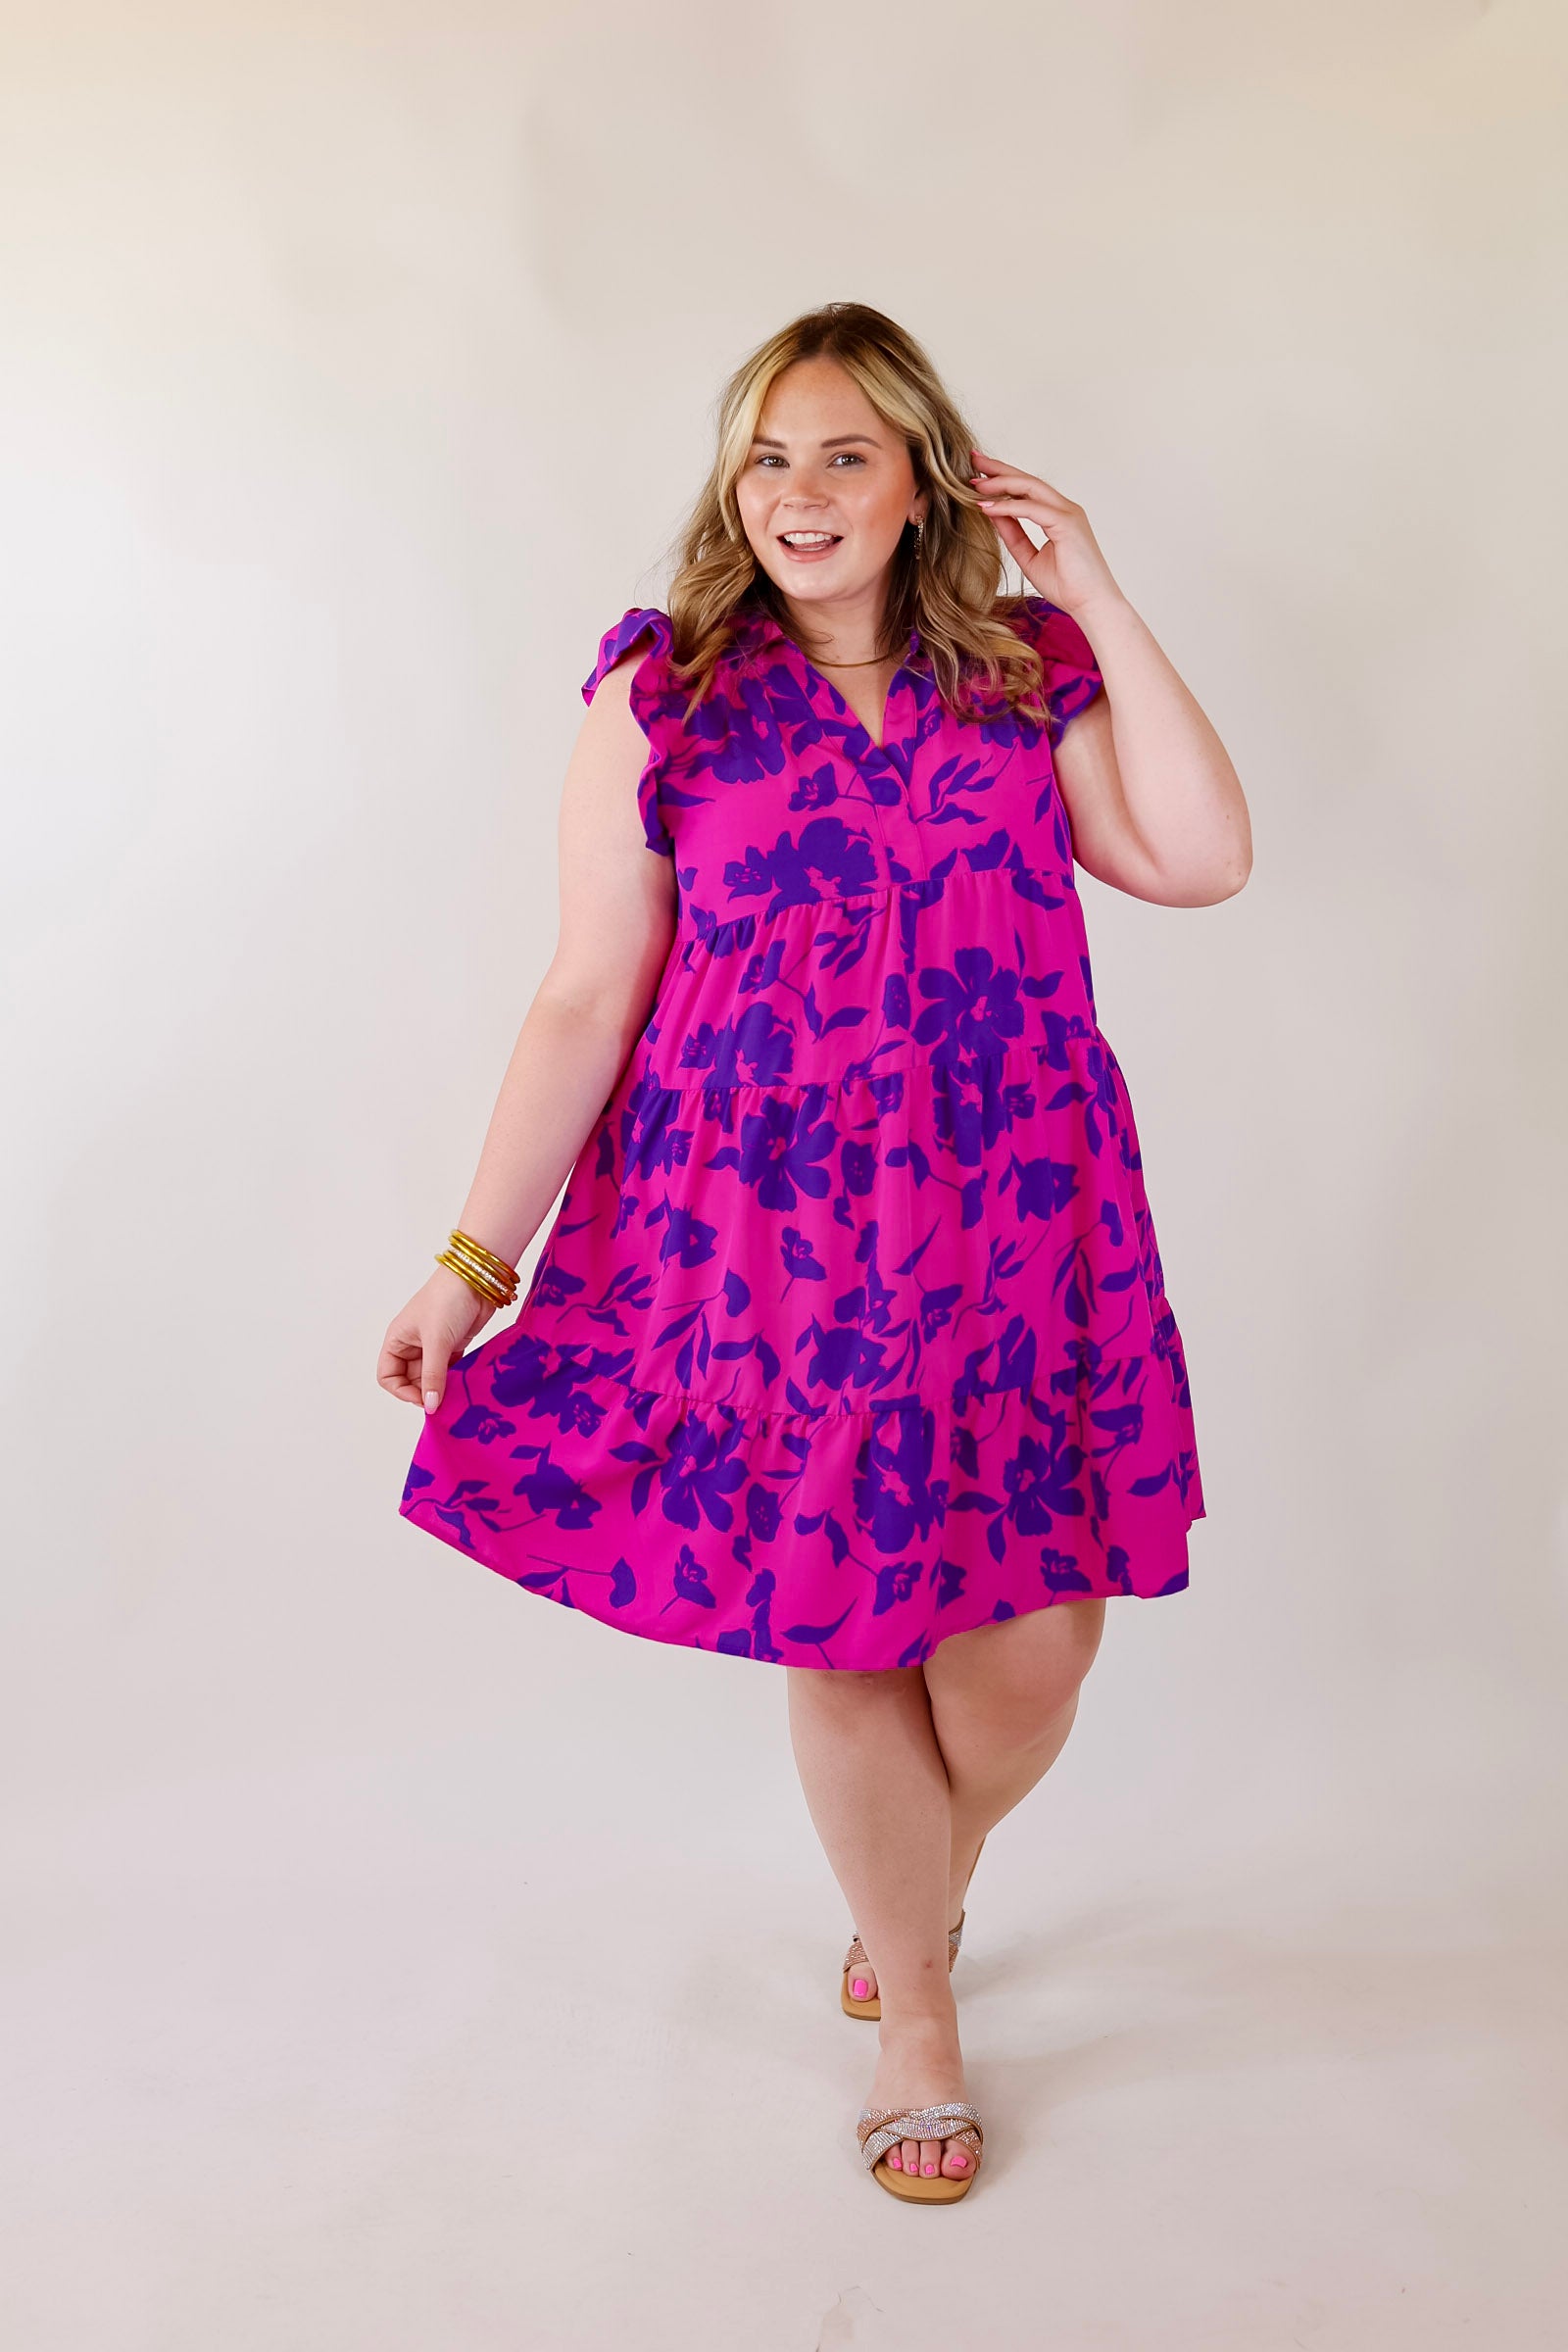 All Of A Sudden Ruffle Cap Sleeve Floral Short Dress in Magenta Mix - Giddy Up Glamour Boutique